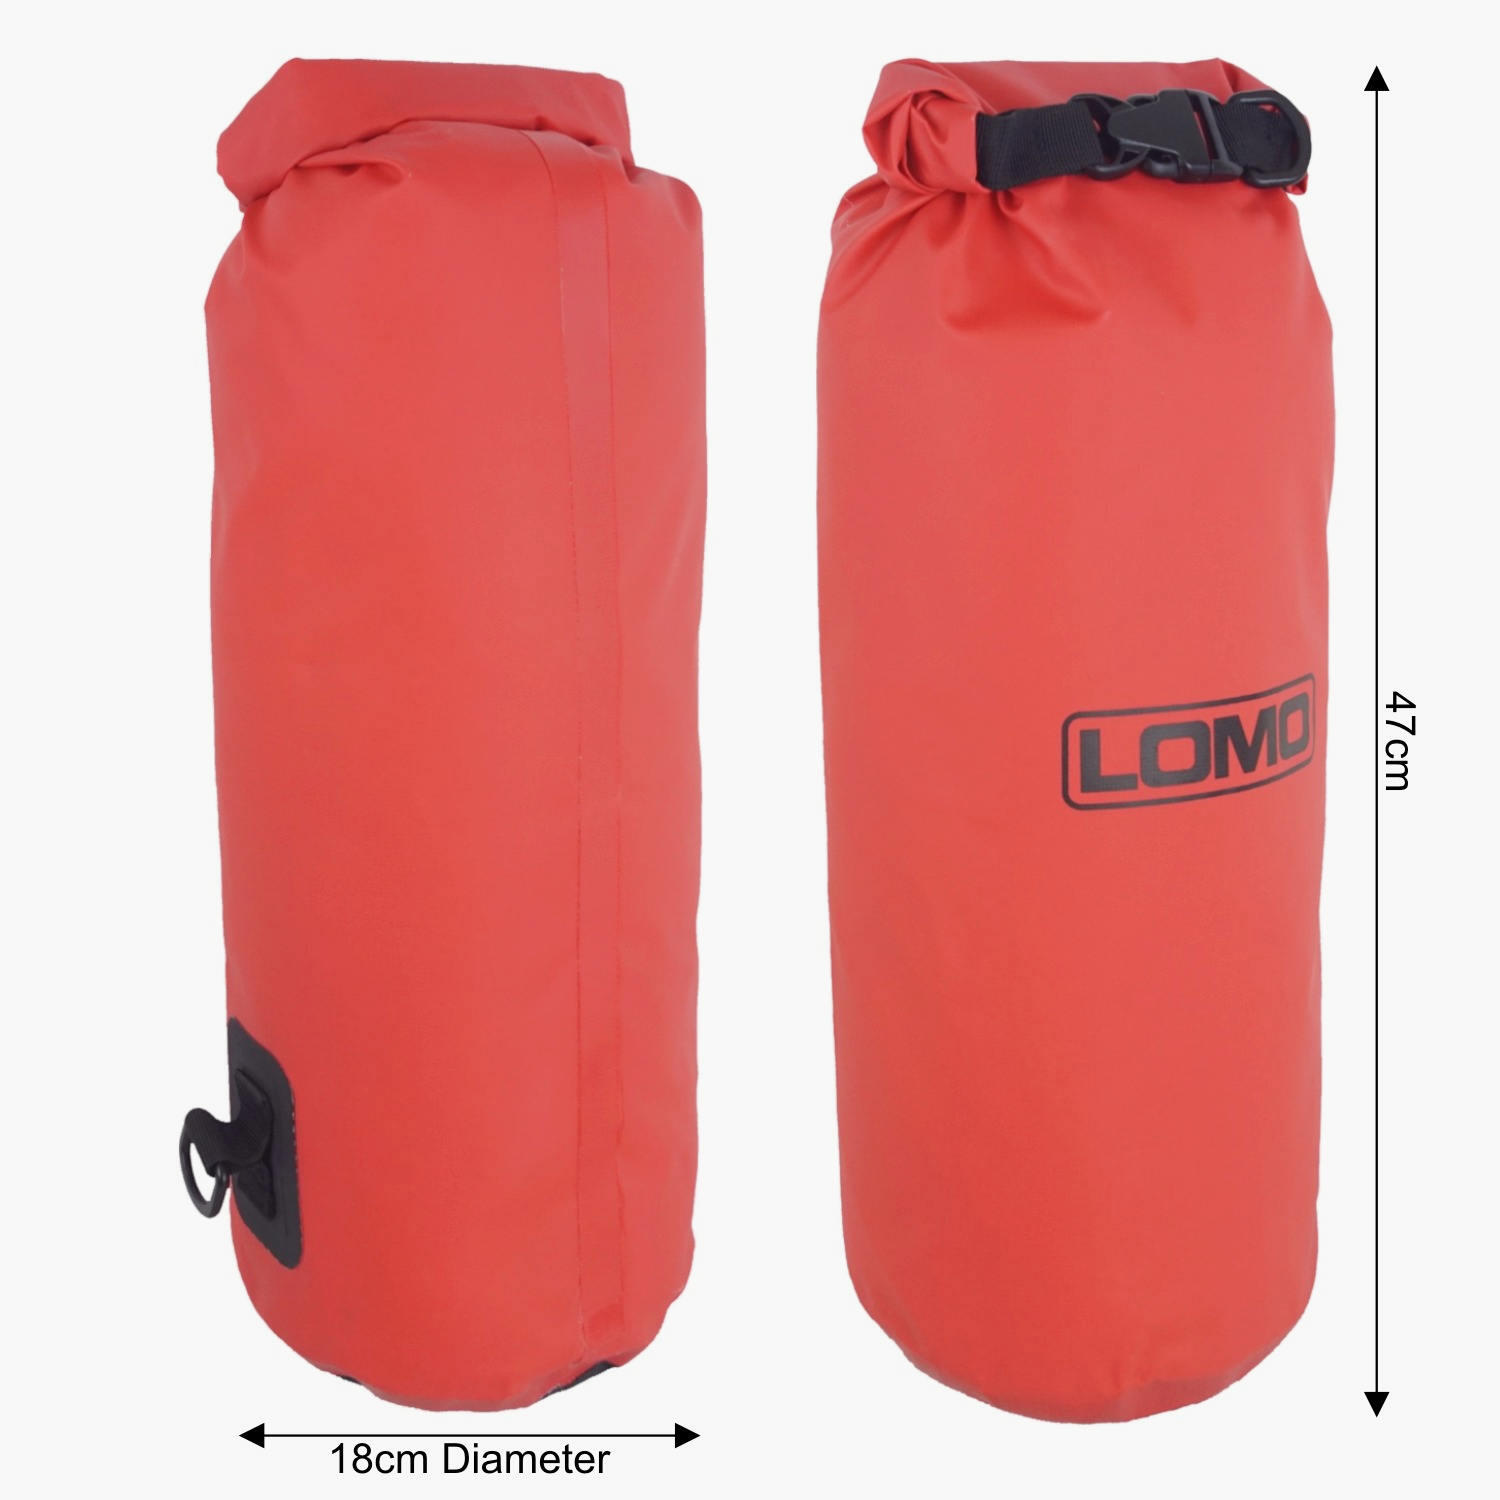 Lomo 12L Drybags - Red heavy duty with shoulder strap 4/7